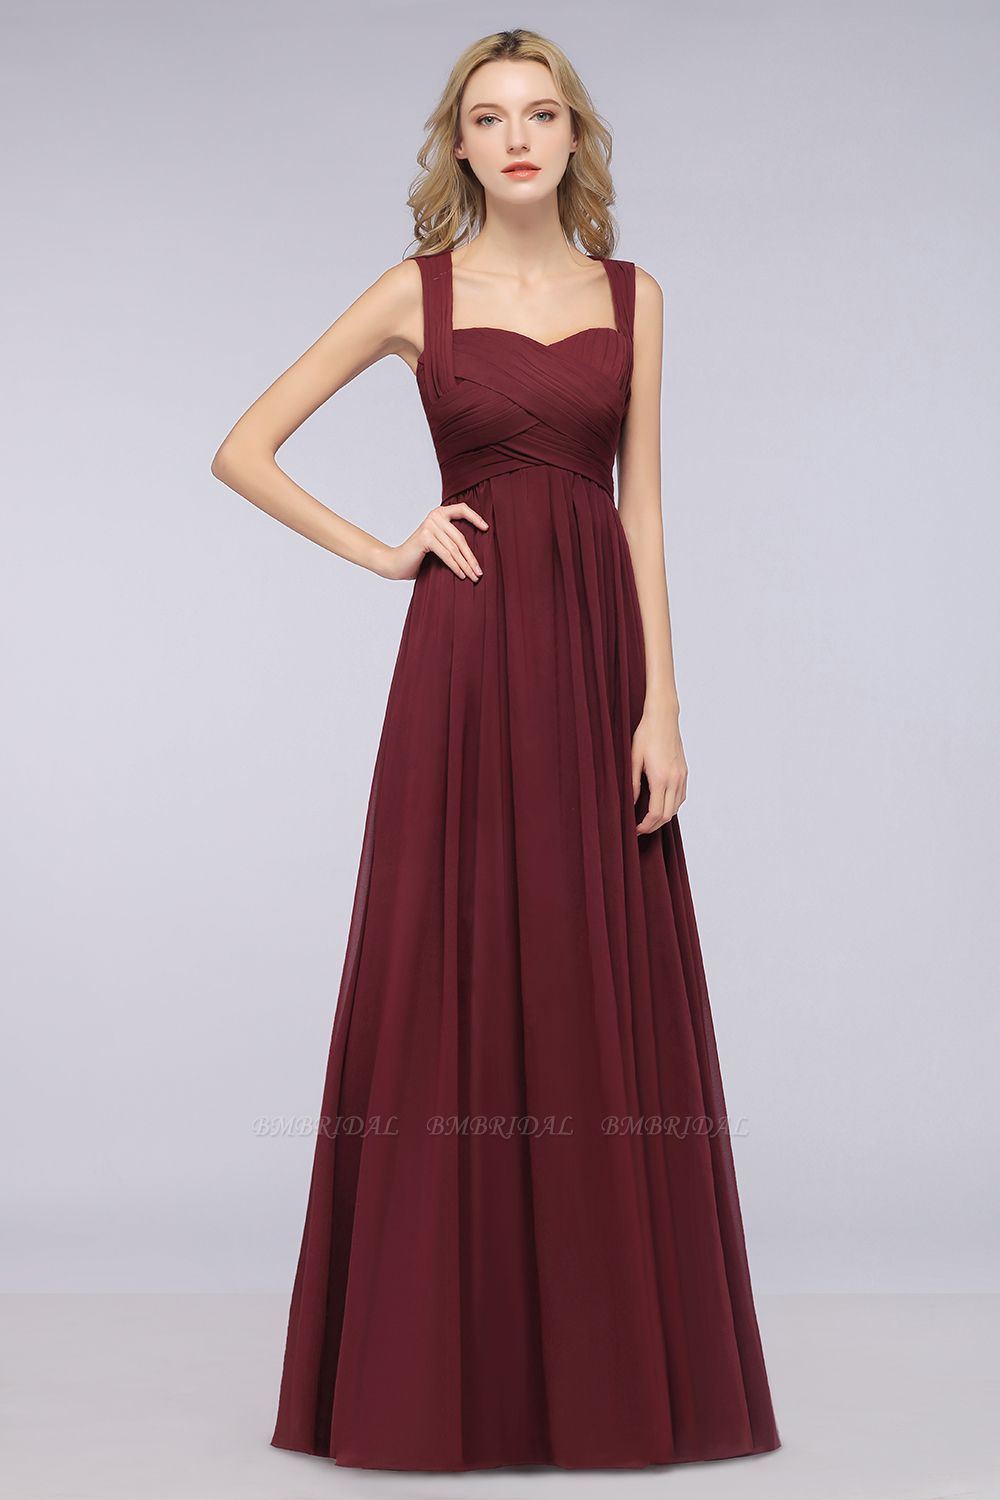 BMbridal Chic Tiered Sweetheart Cap-Sleeves Bungurdy Bridesmaid Dresses